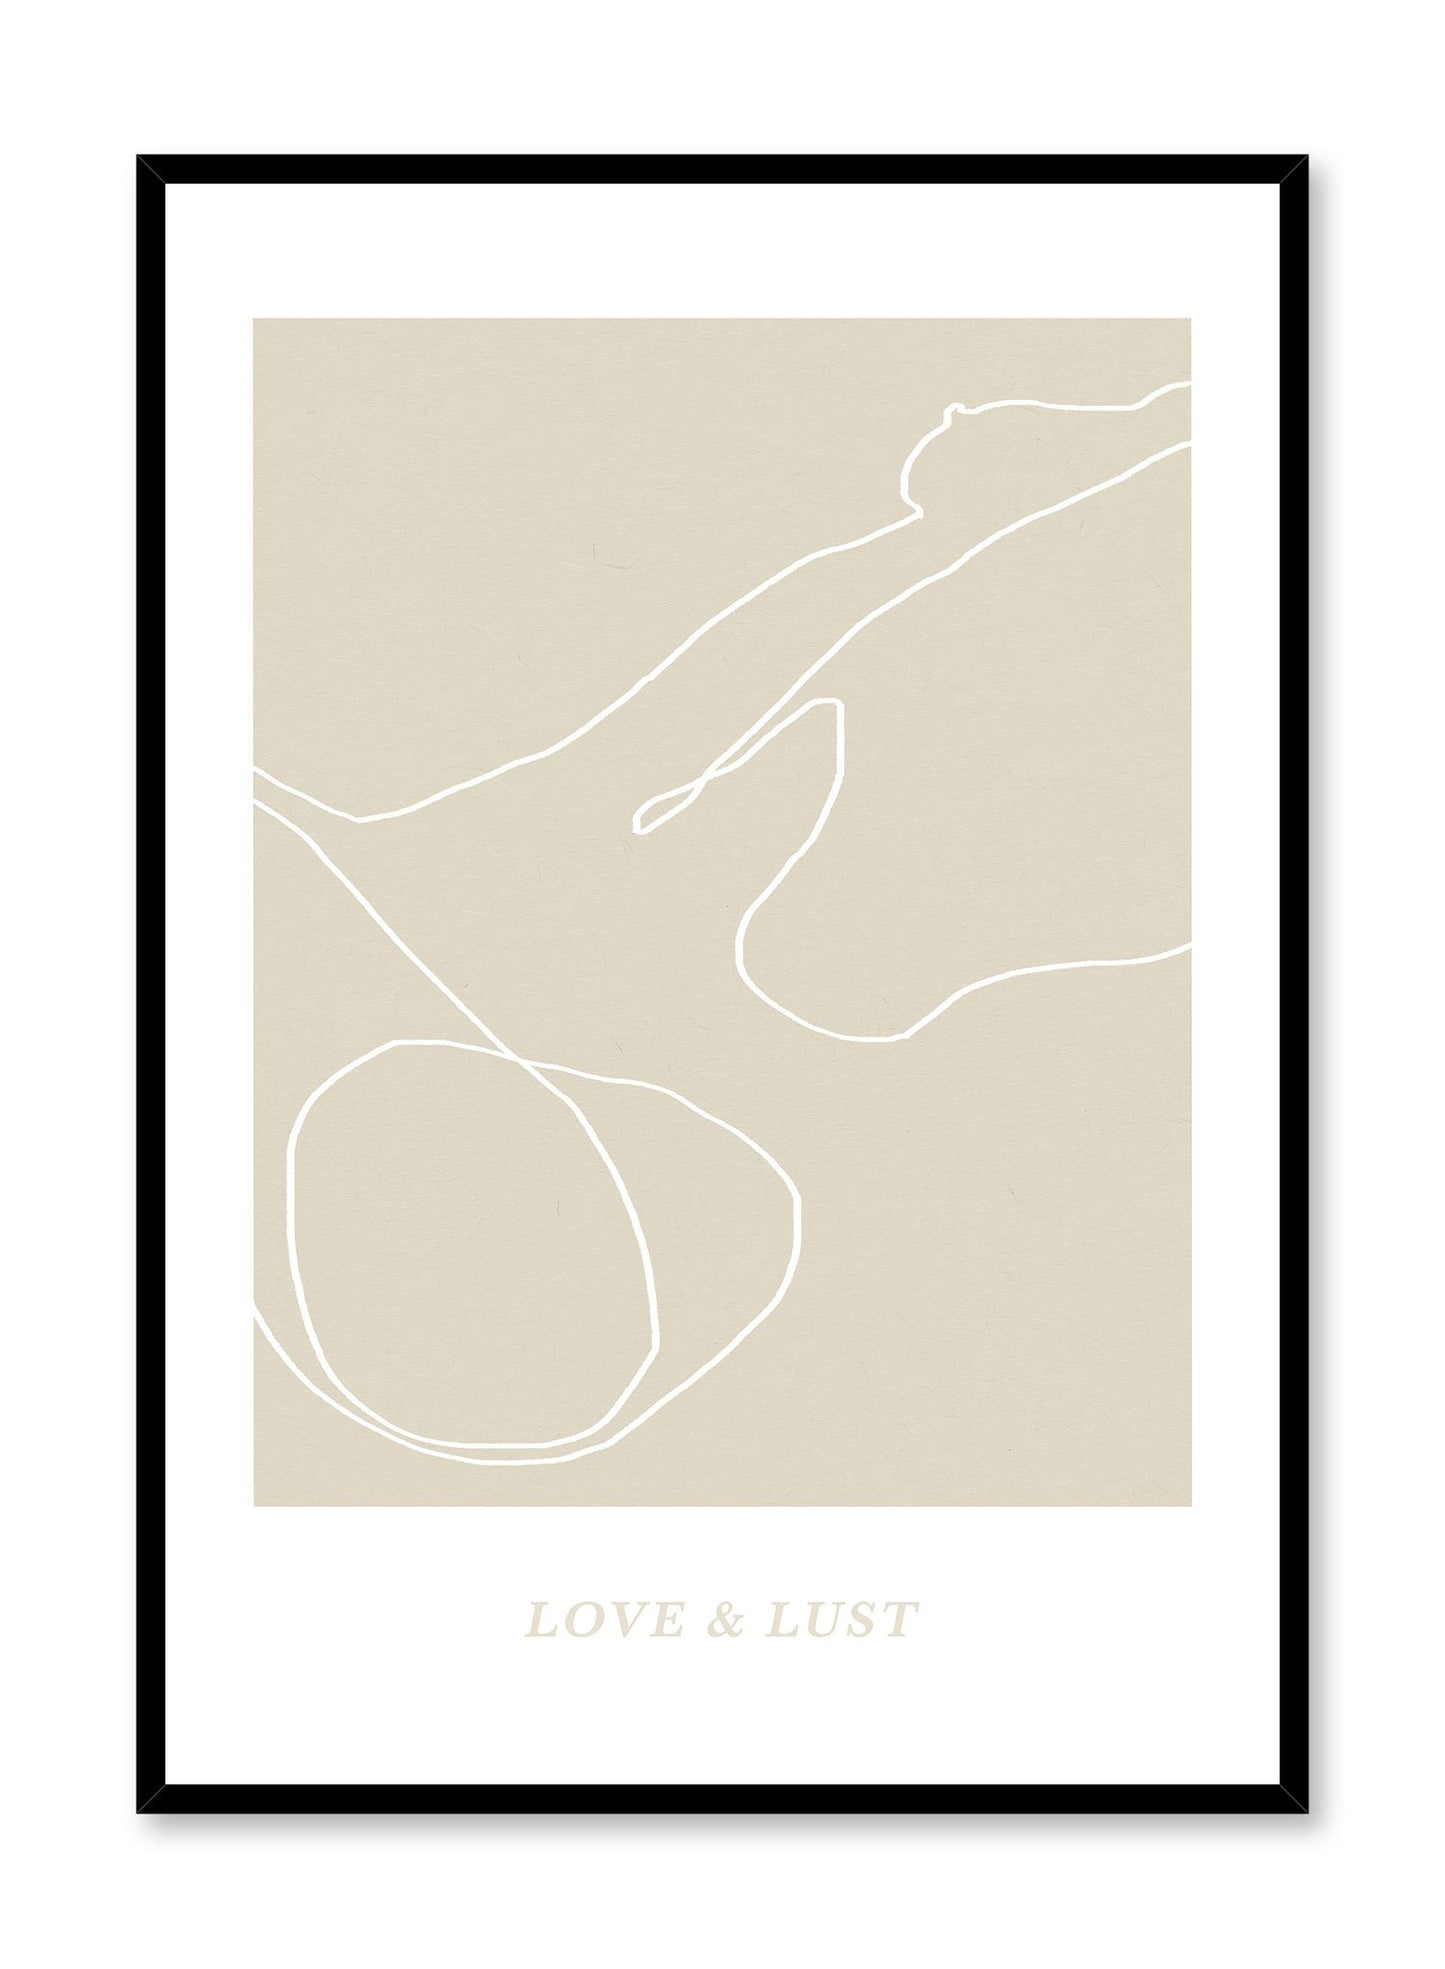 Love & Lust is a continuous line art illustration with the words 'Love & Lust' by Opposite Wall.